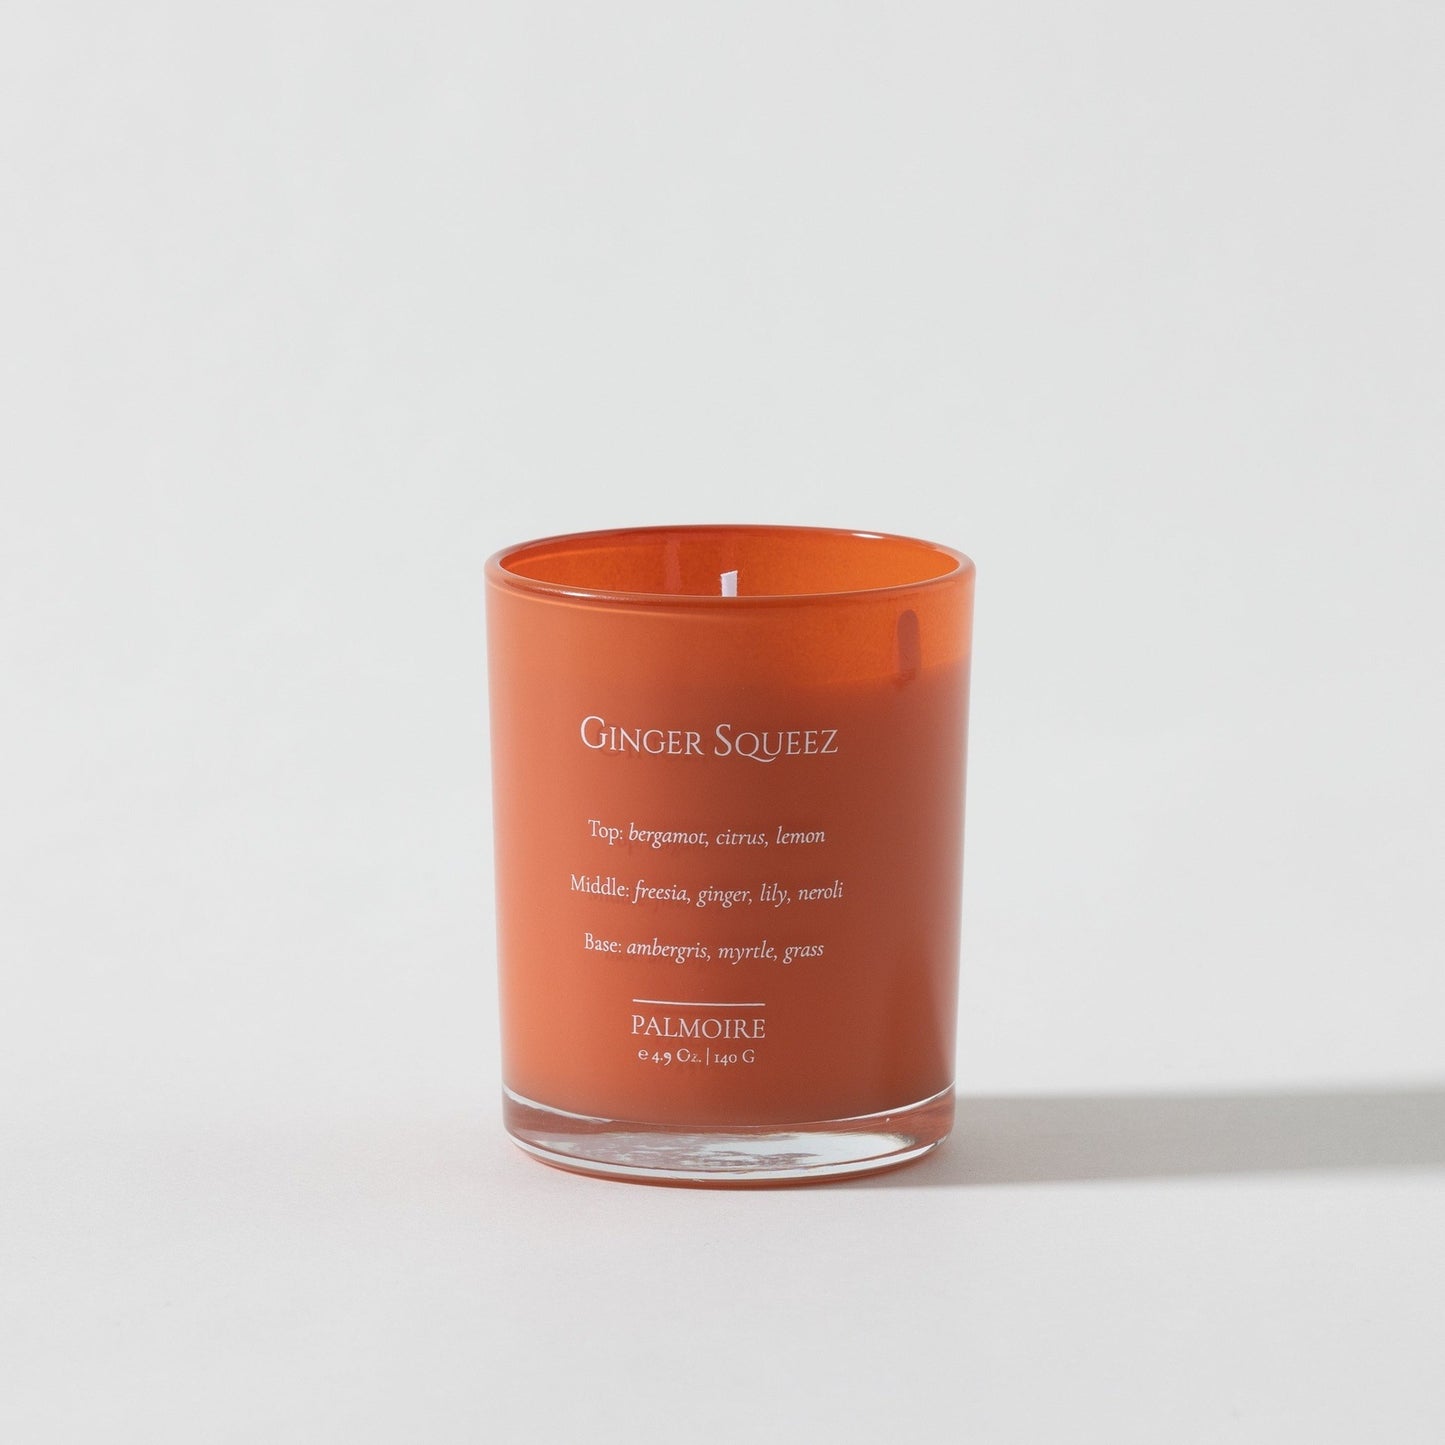 Ginger Squeeze Soy Wax Candle - Fortunate Lemon Shop